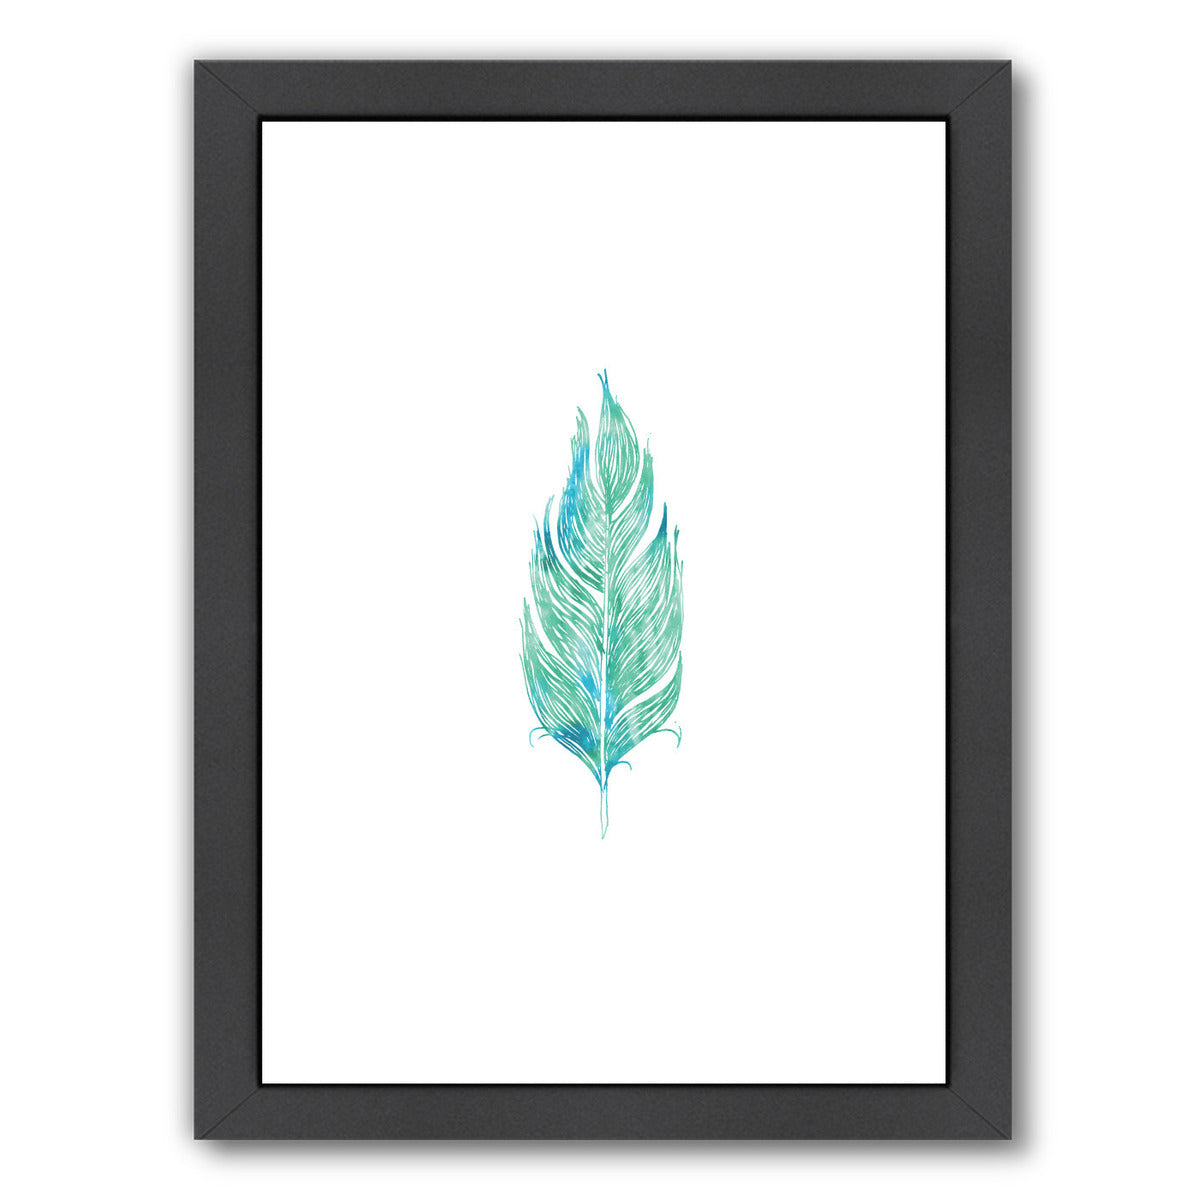 Green Feather By Wall + Wonder - Black Framed Print - Wall Art - Americanflat